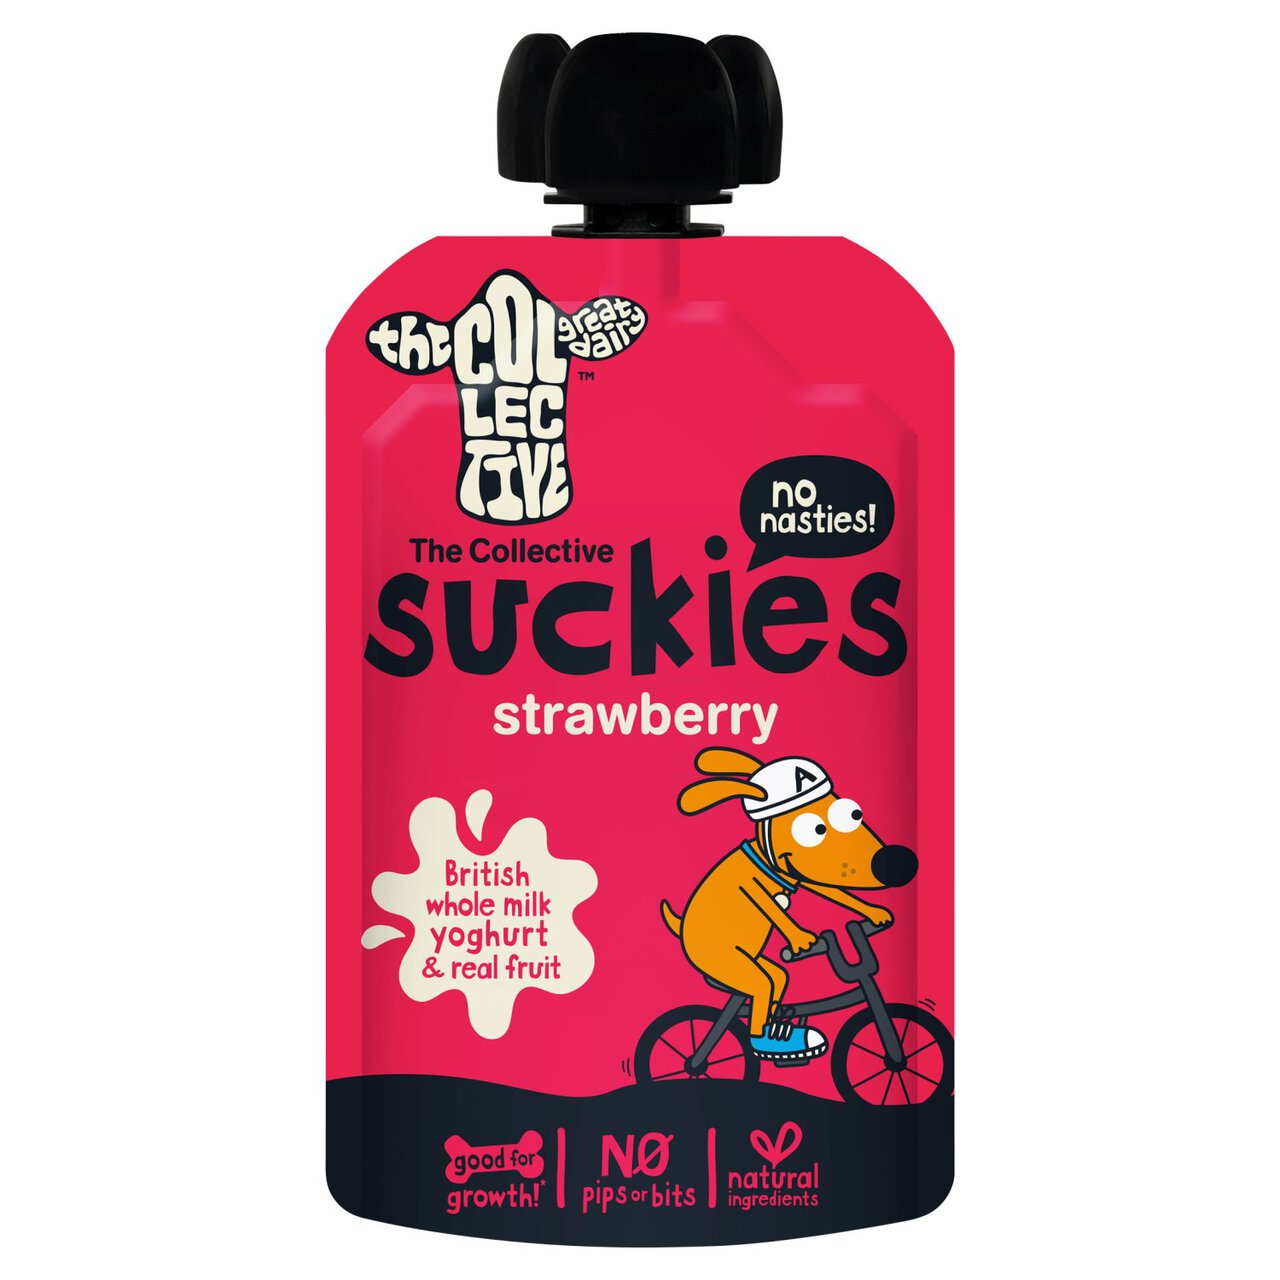 The Collective Suckies Strawberry Yoghurt 100g